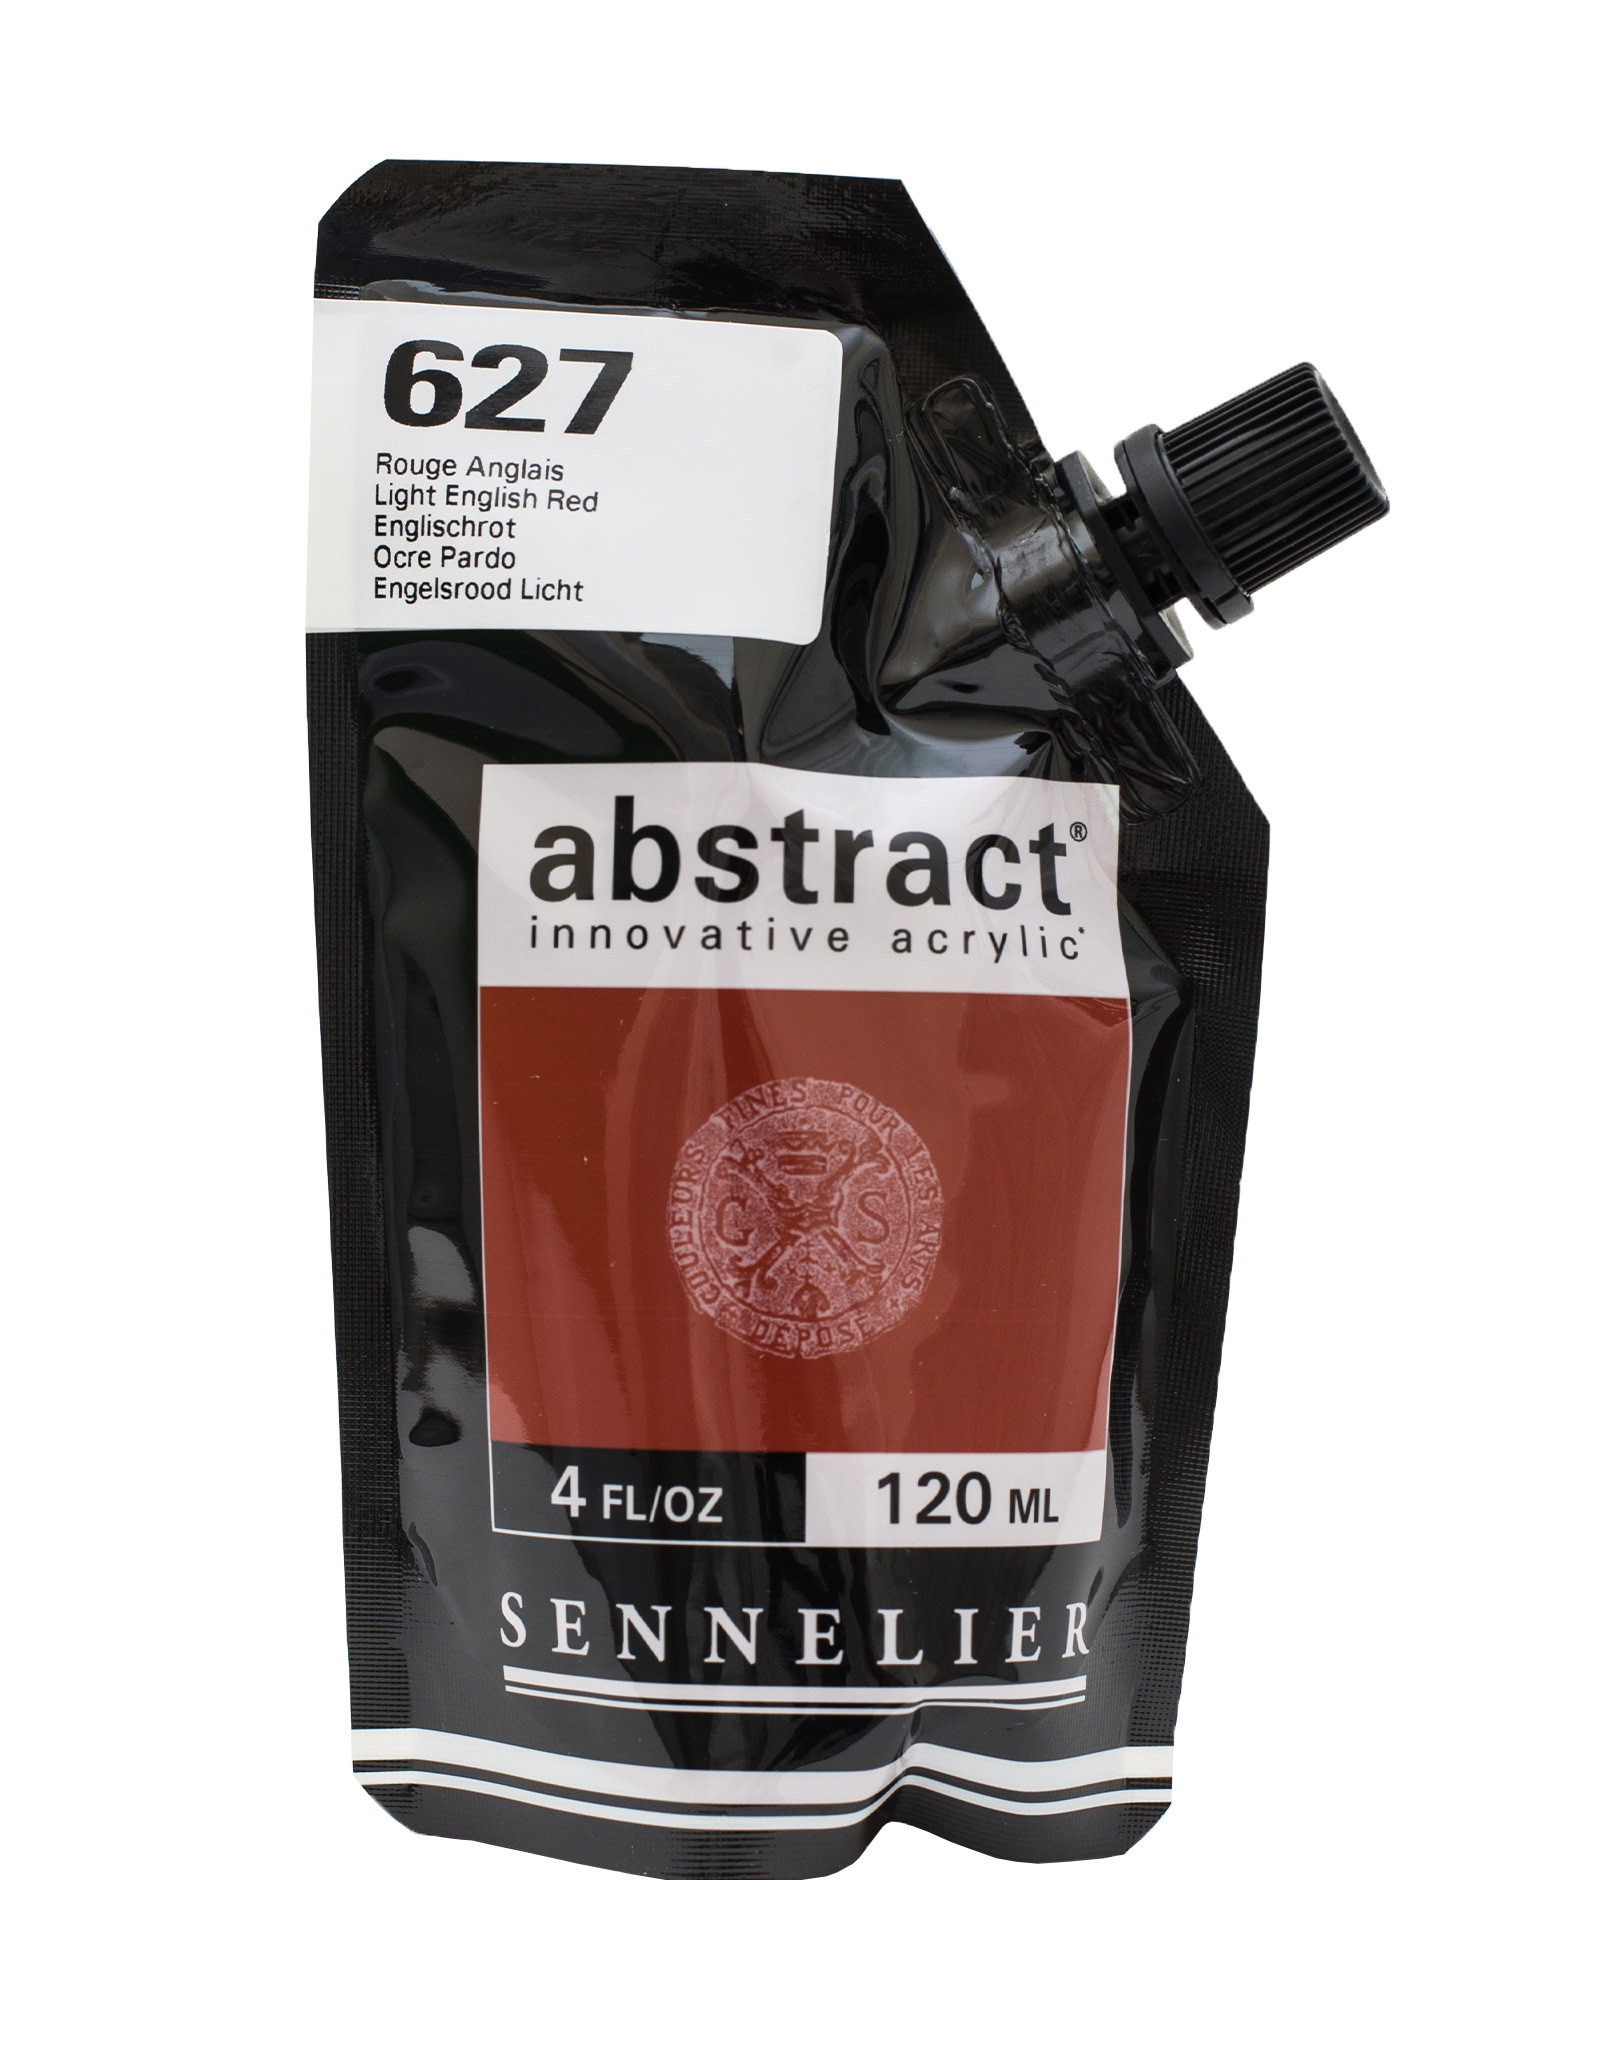 Sennelier Sennelier Abstract Acrylic, Light English Red 120ml